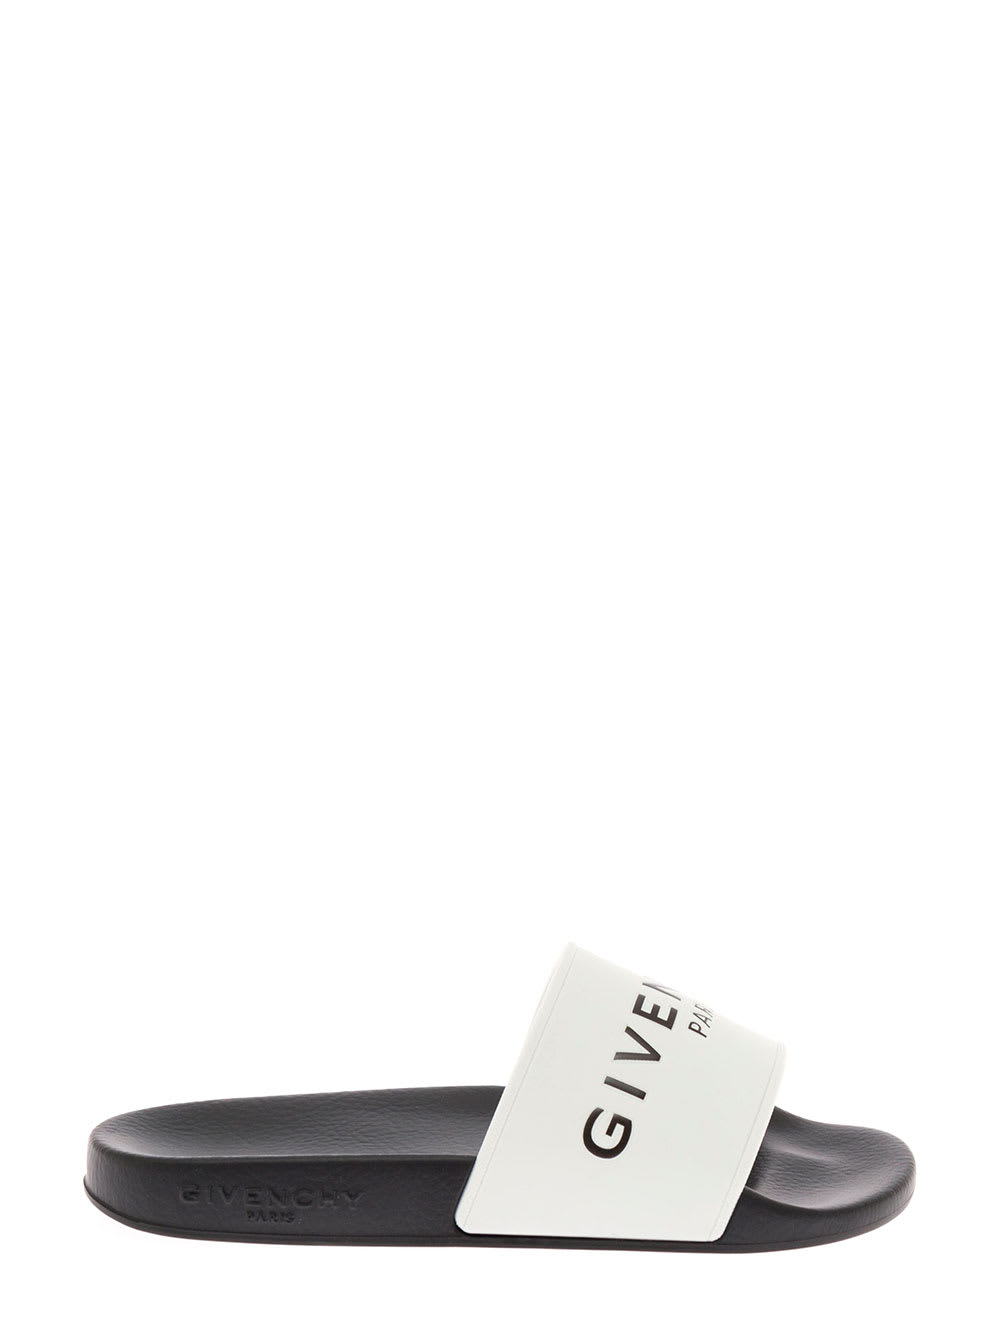 Givenchy Gvenchy Kids Boys Black And White Slide Rubber Sandals With Logo